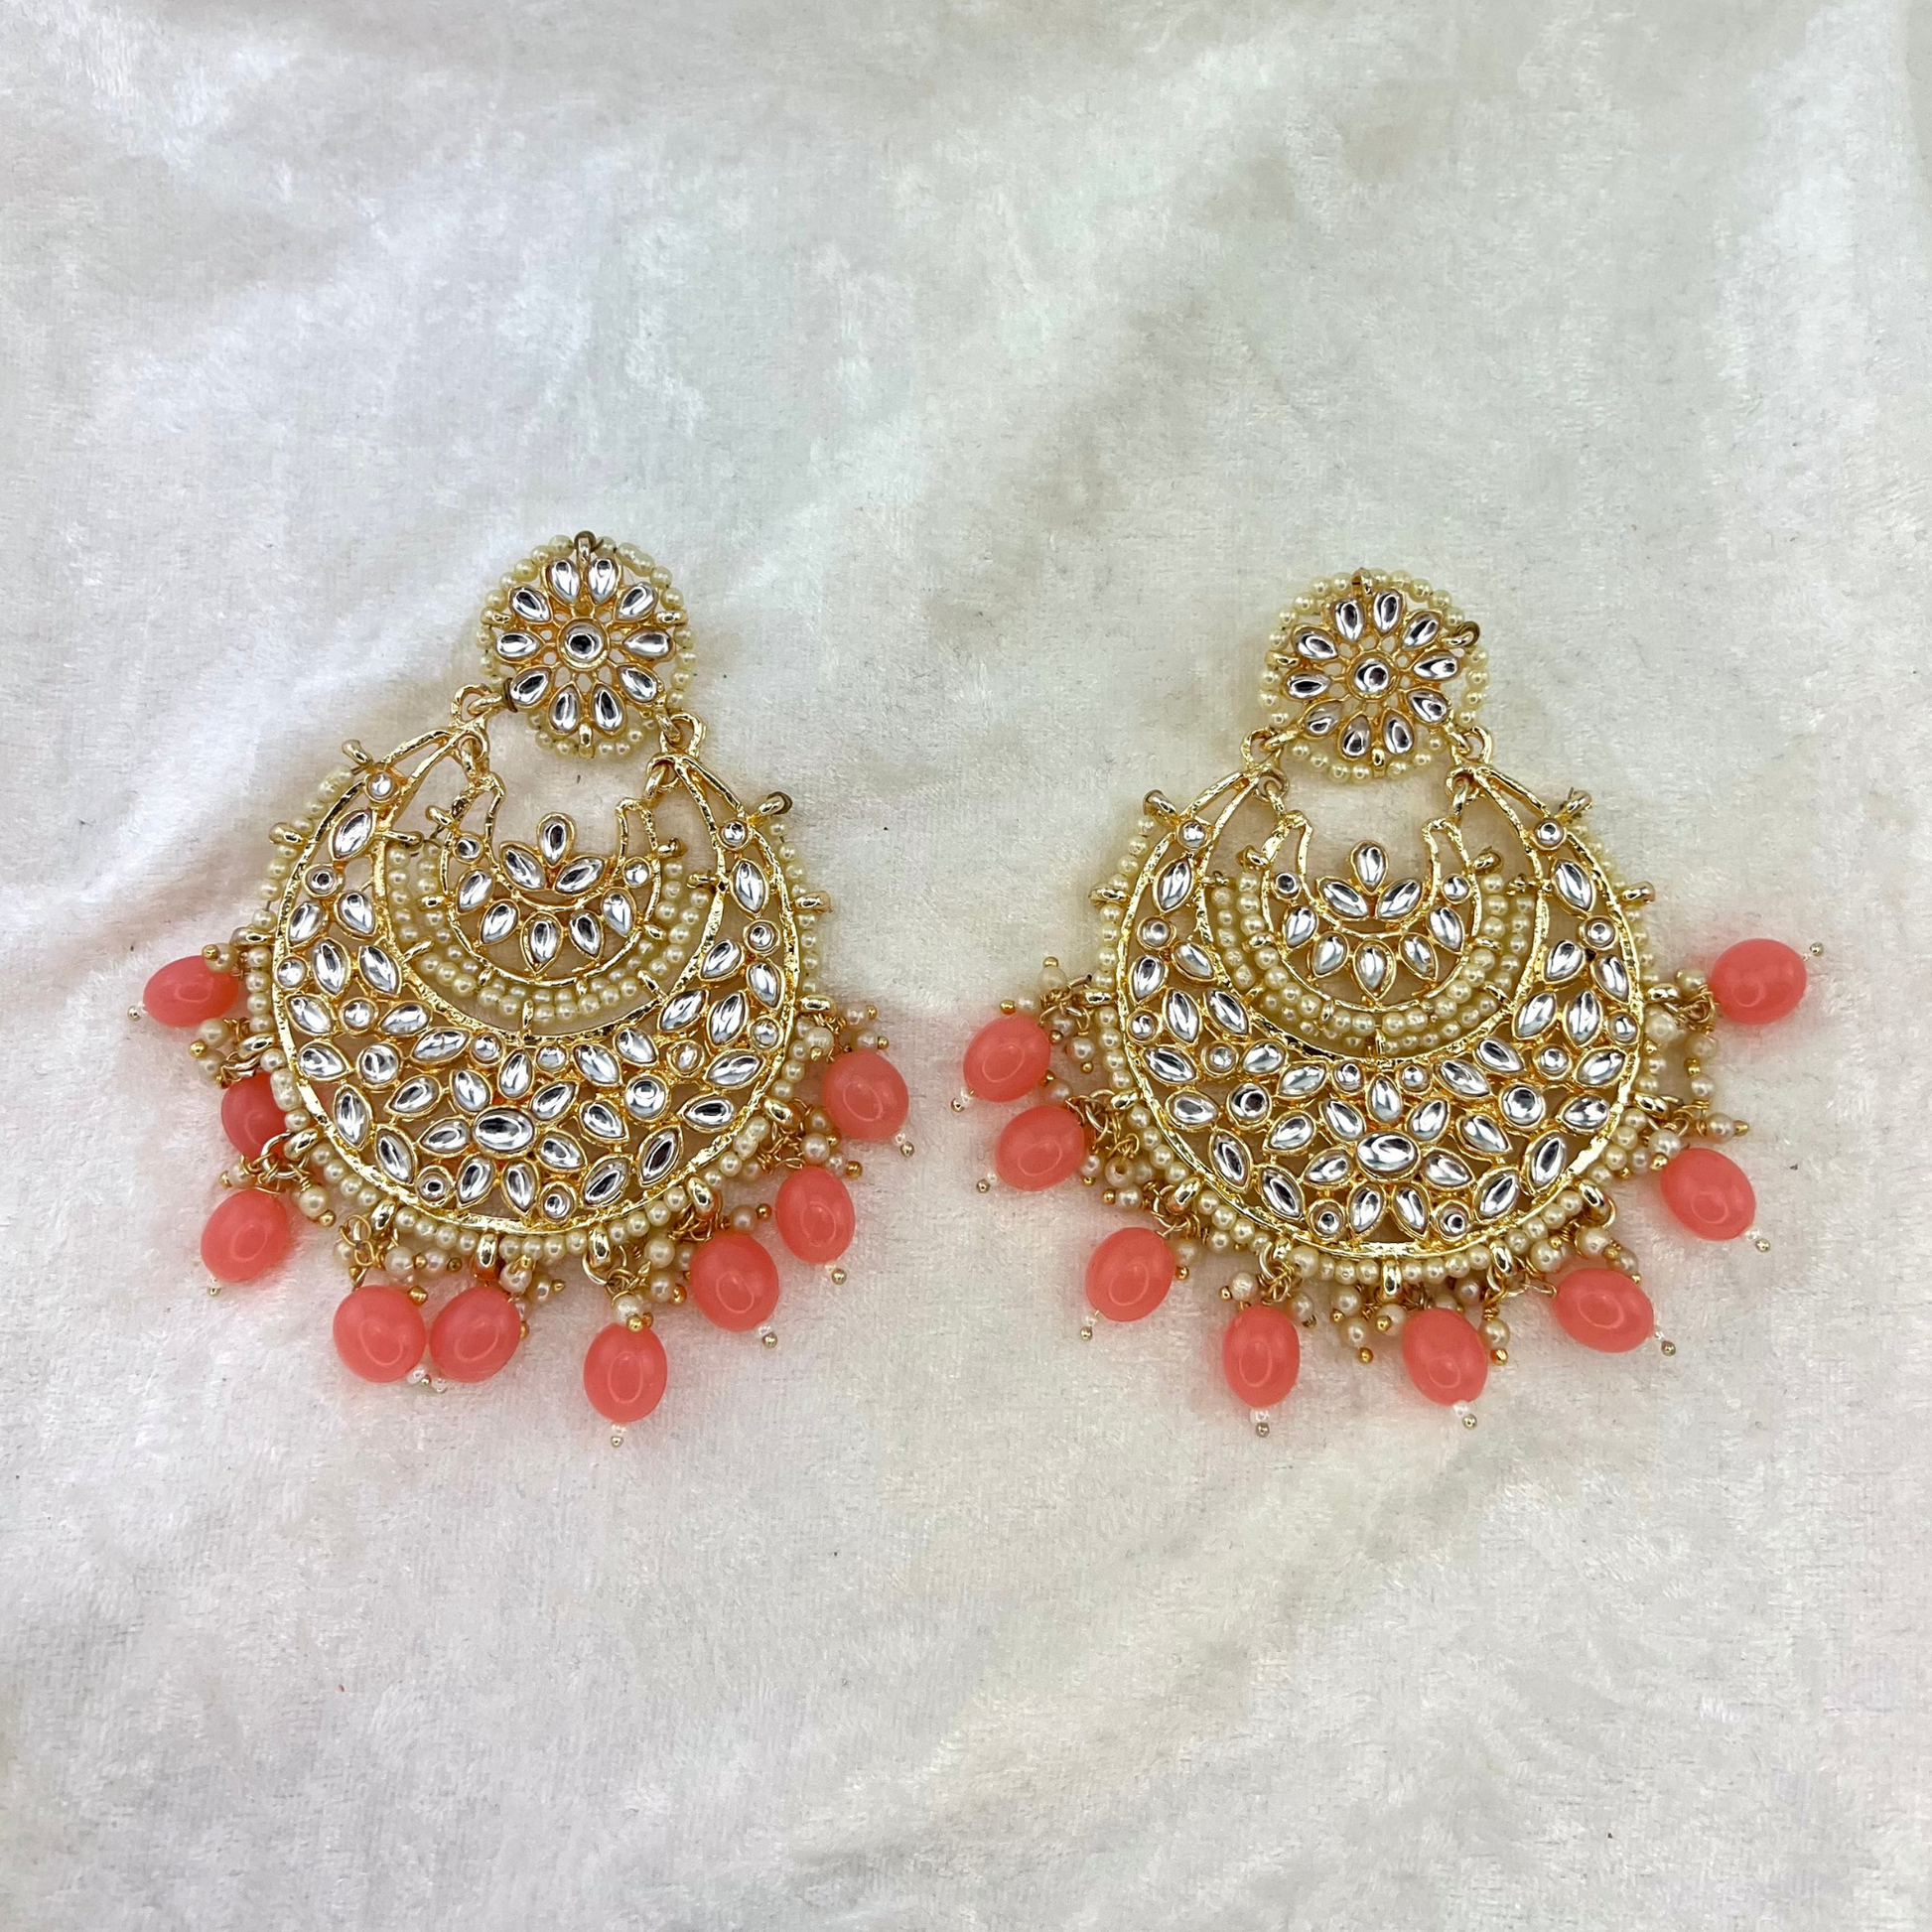 Indian wedding jewellery - large earrinfs with high quality stones and beads in Baby Pink